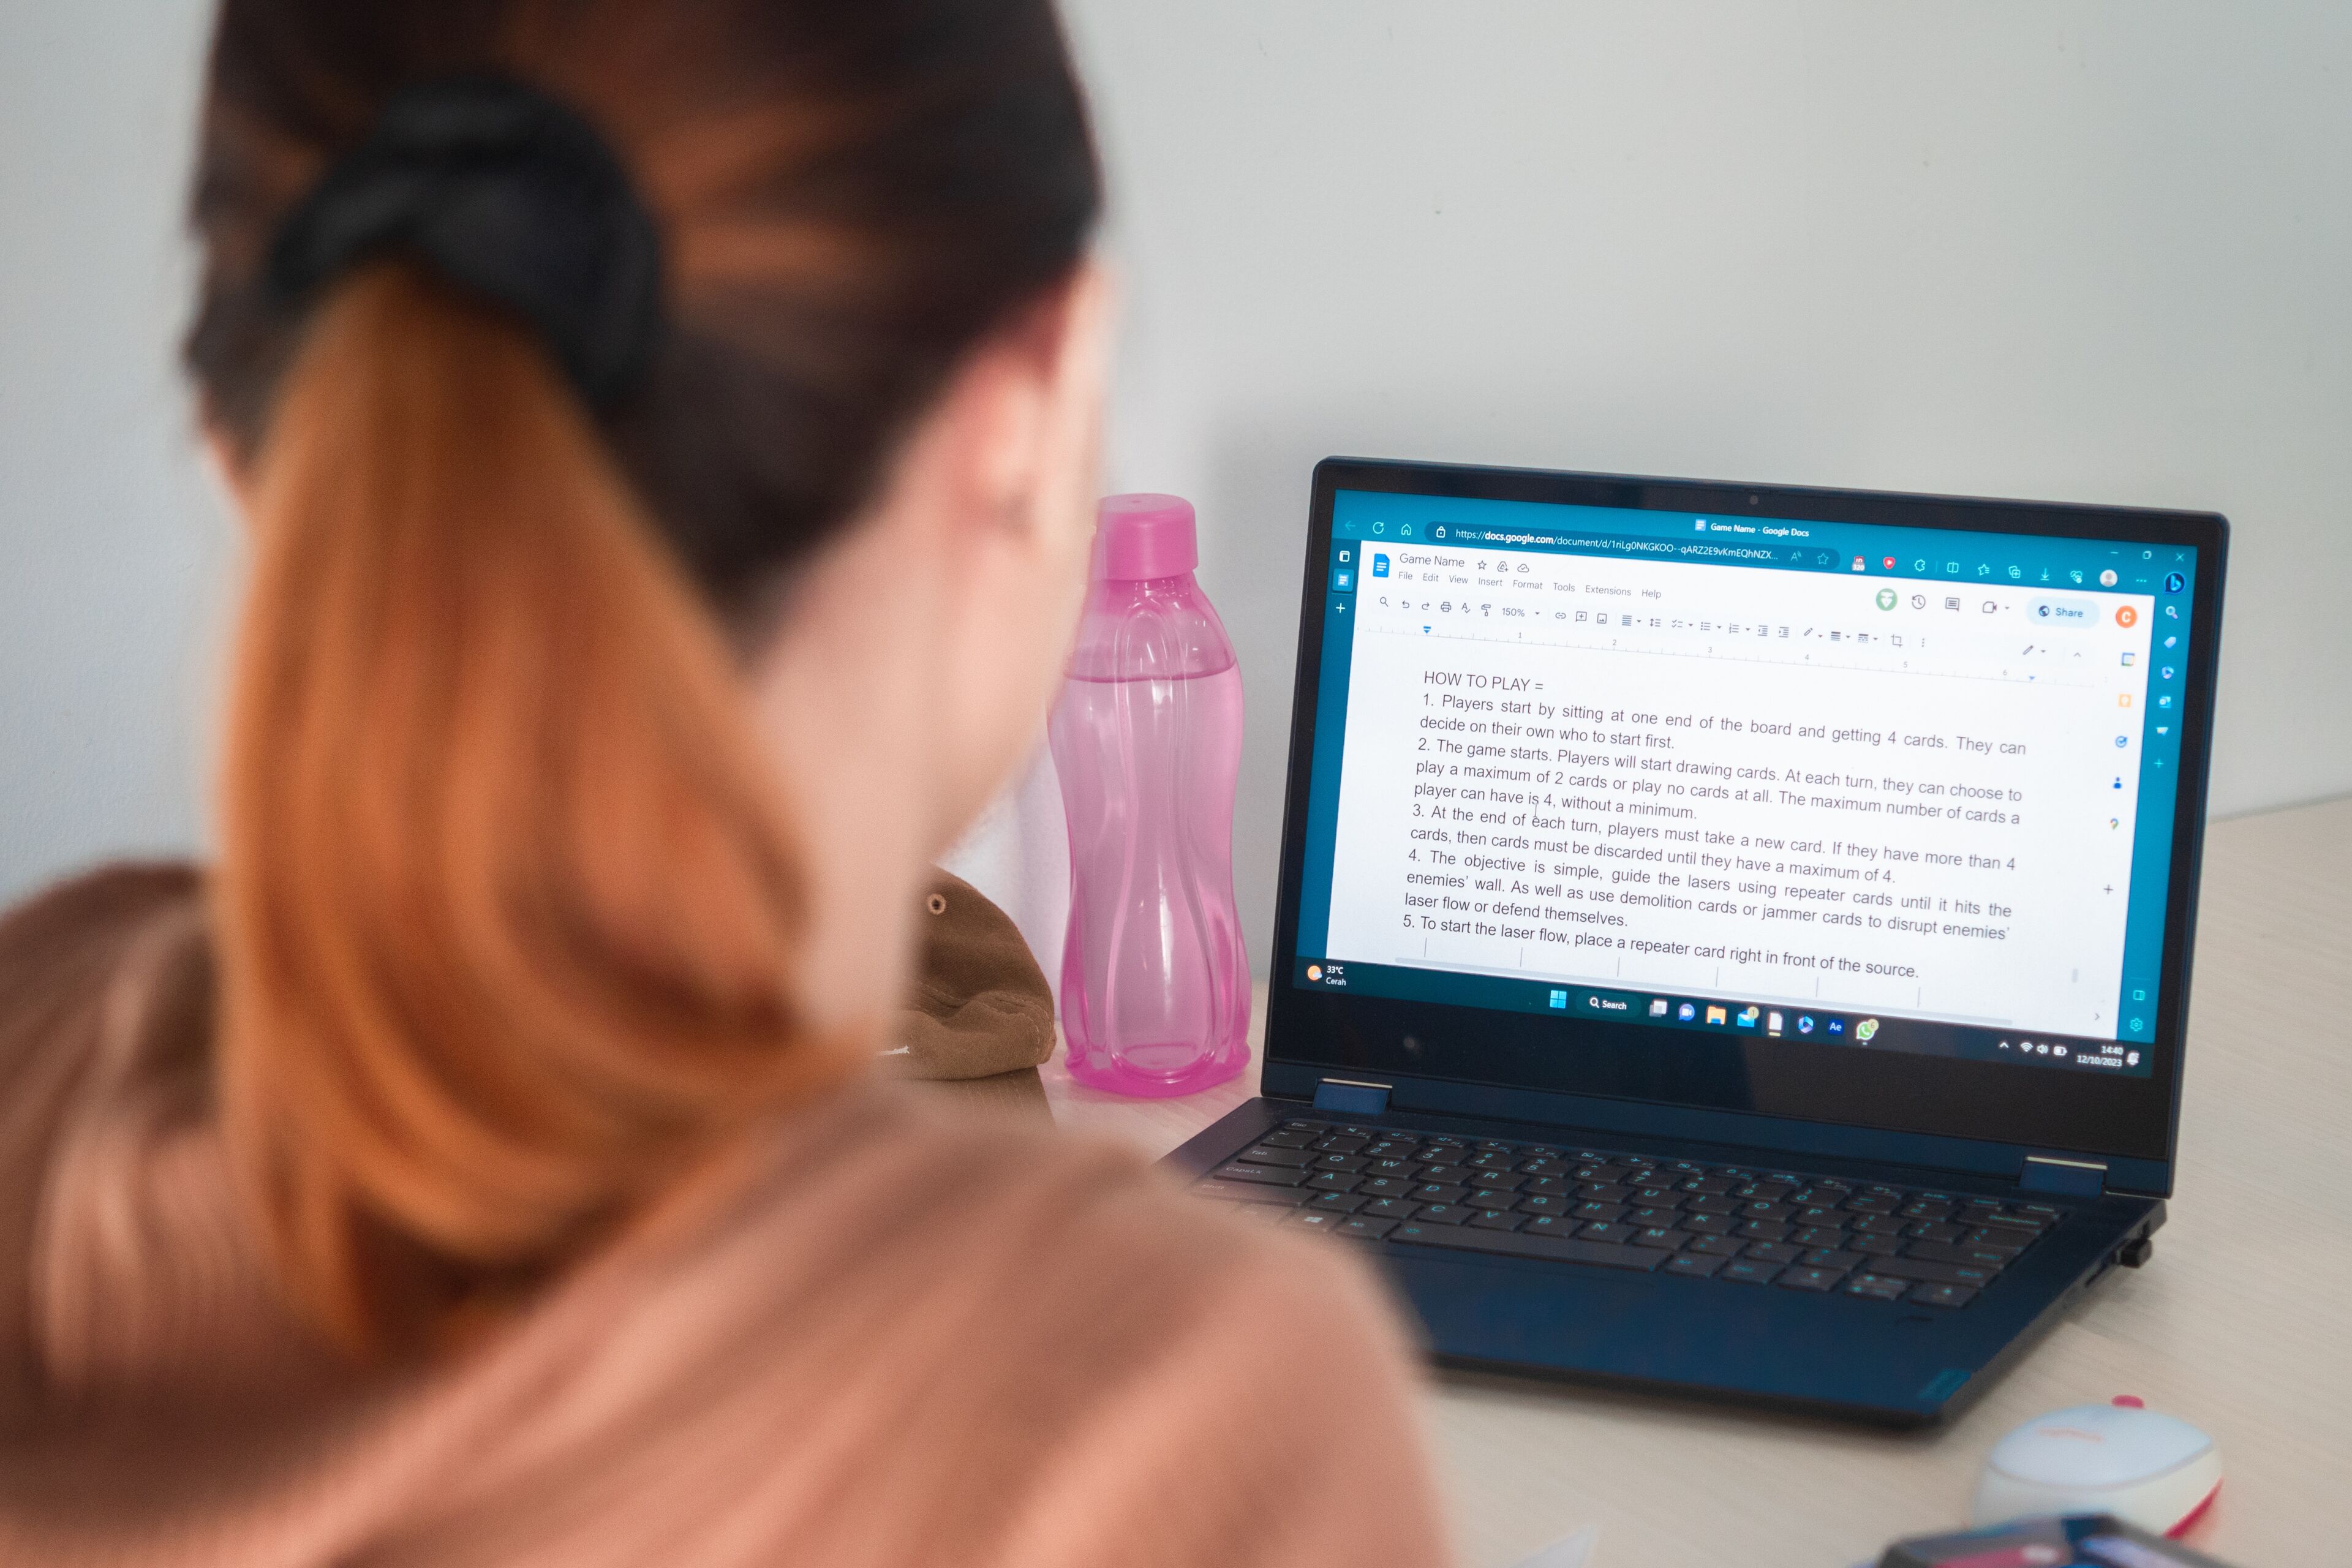 Over-the-shoulder view of a woman with a ponytail using a laptop, displaying a text document about game rules.